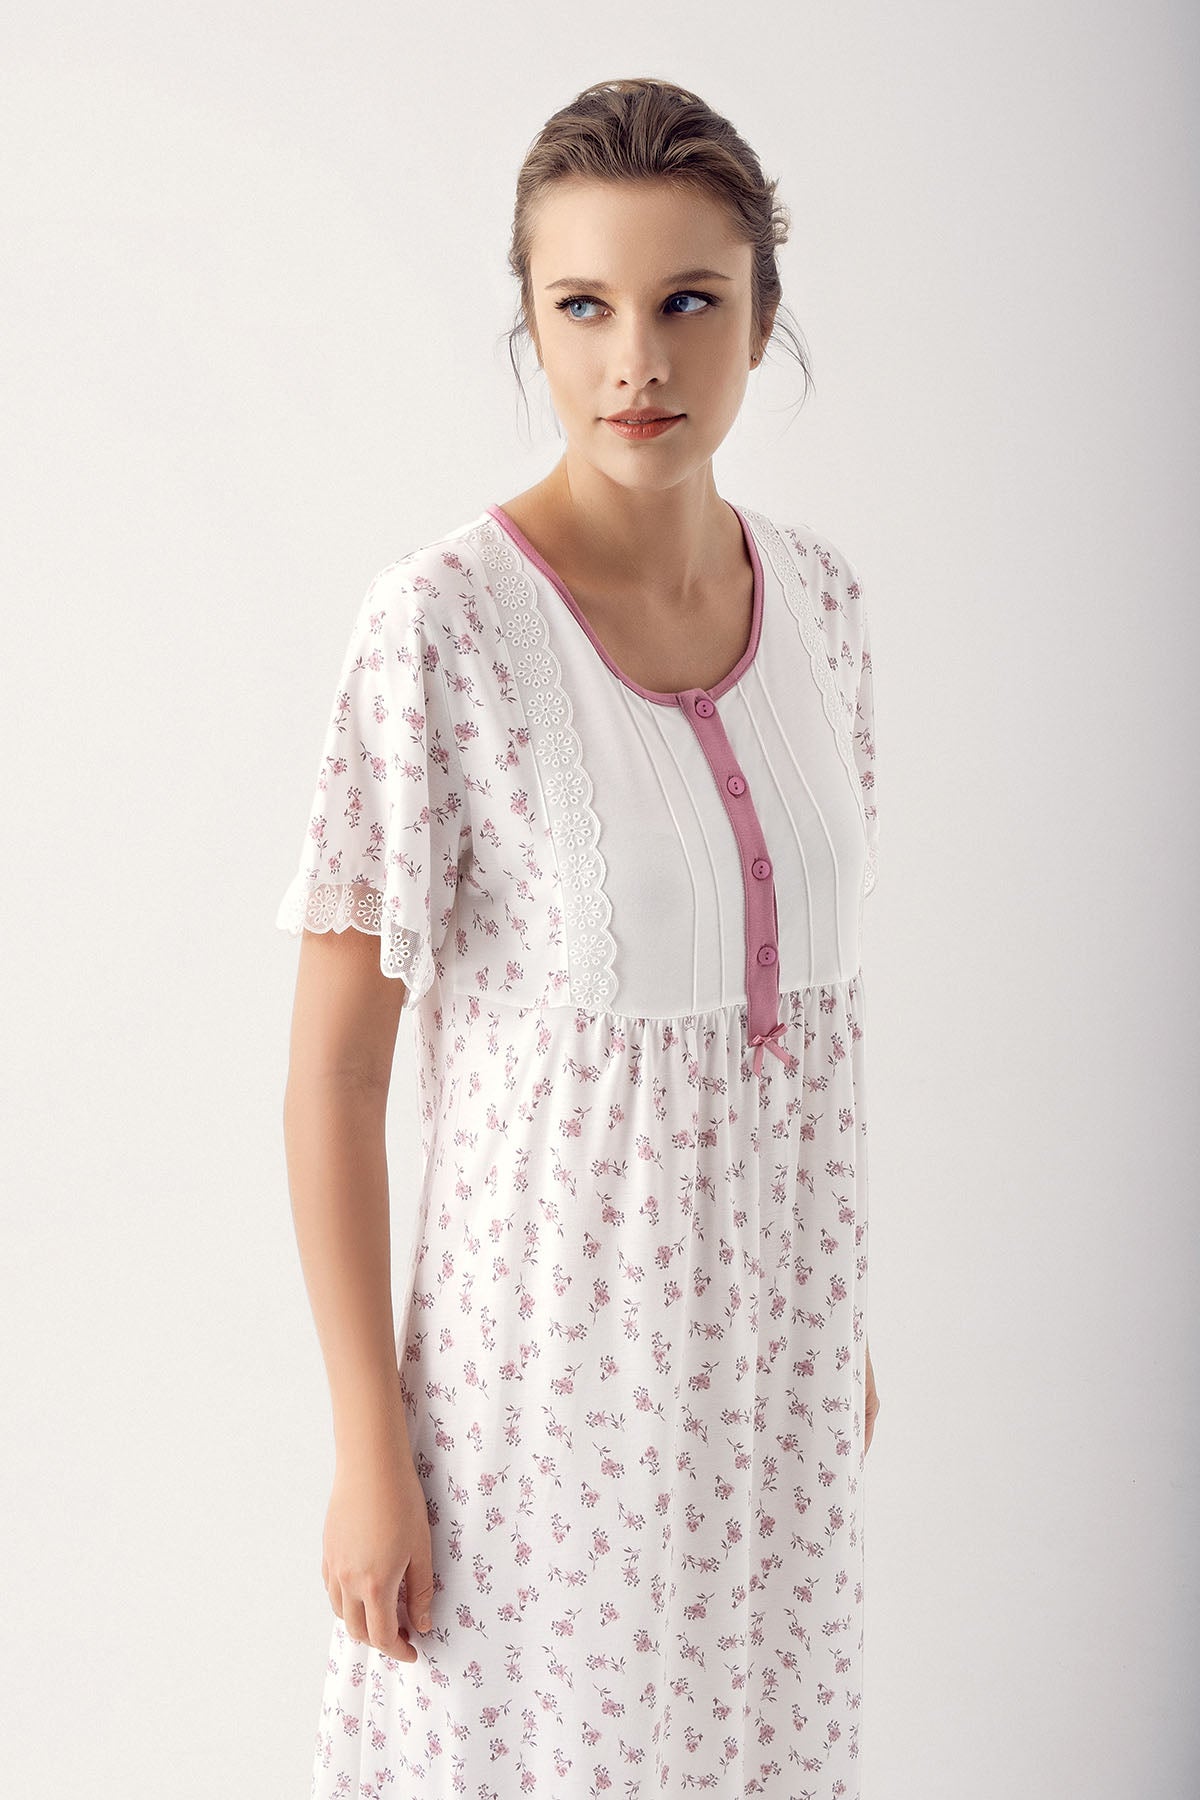 Flower Pattern Lace Plus Size Maternity & Nursing Nightgown Dried Rose - 14113